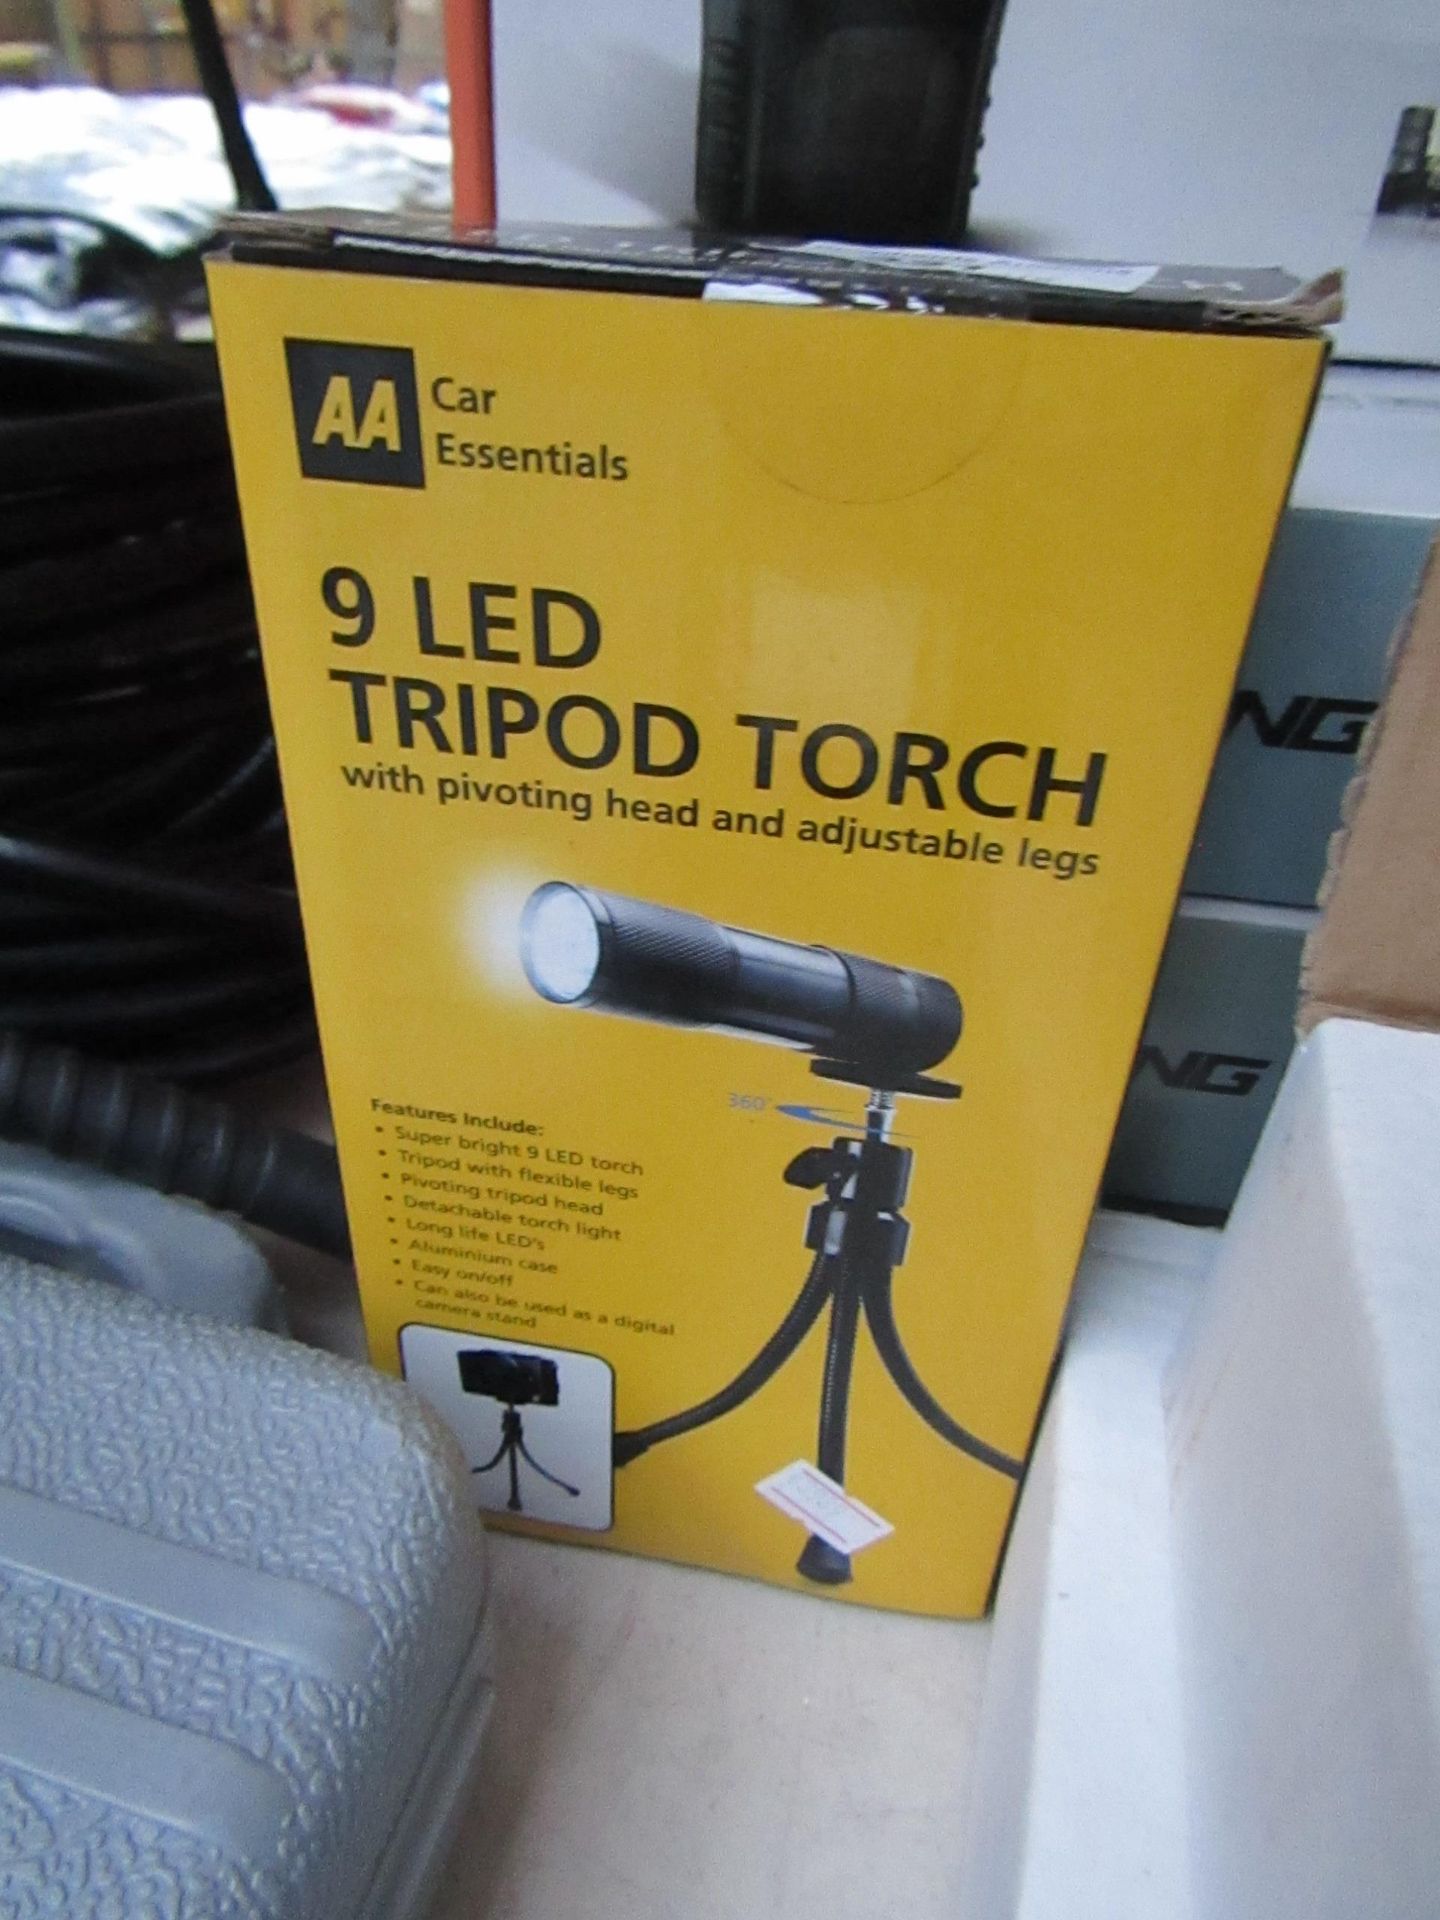 AA 9 LED Tripod Torch, new and boxed